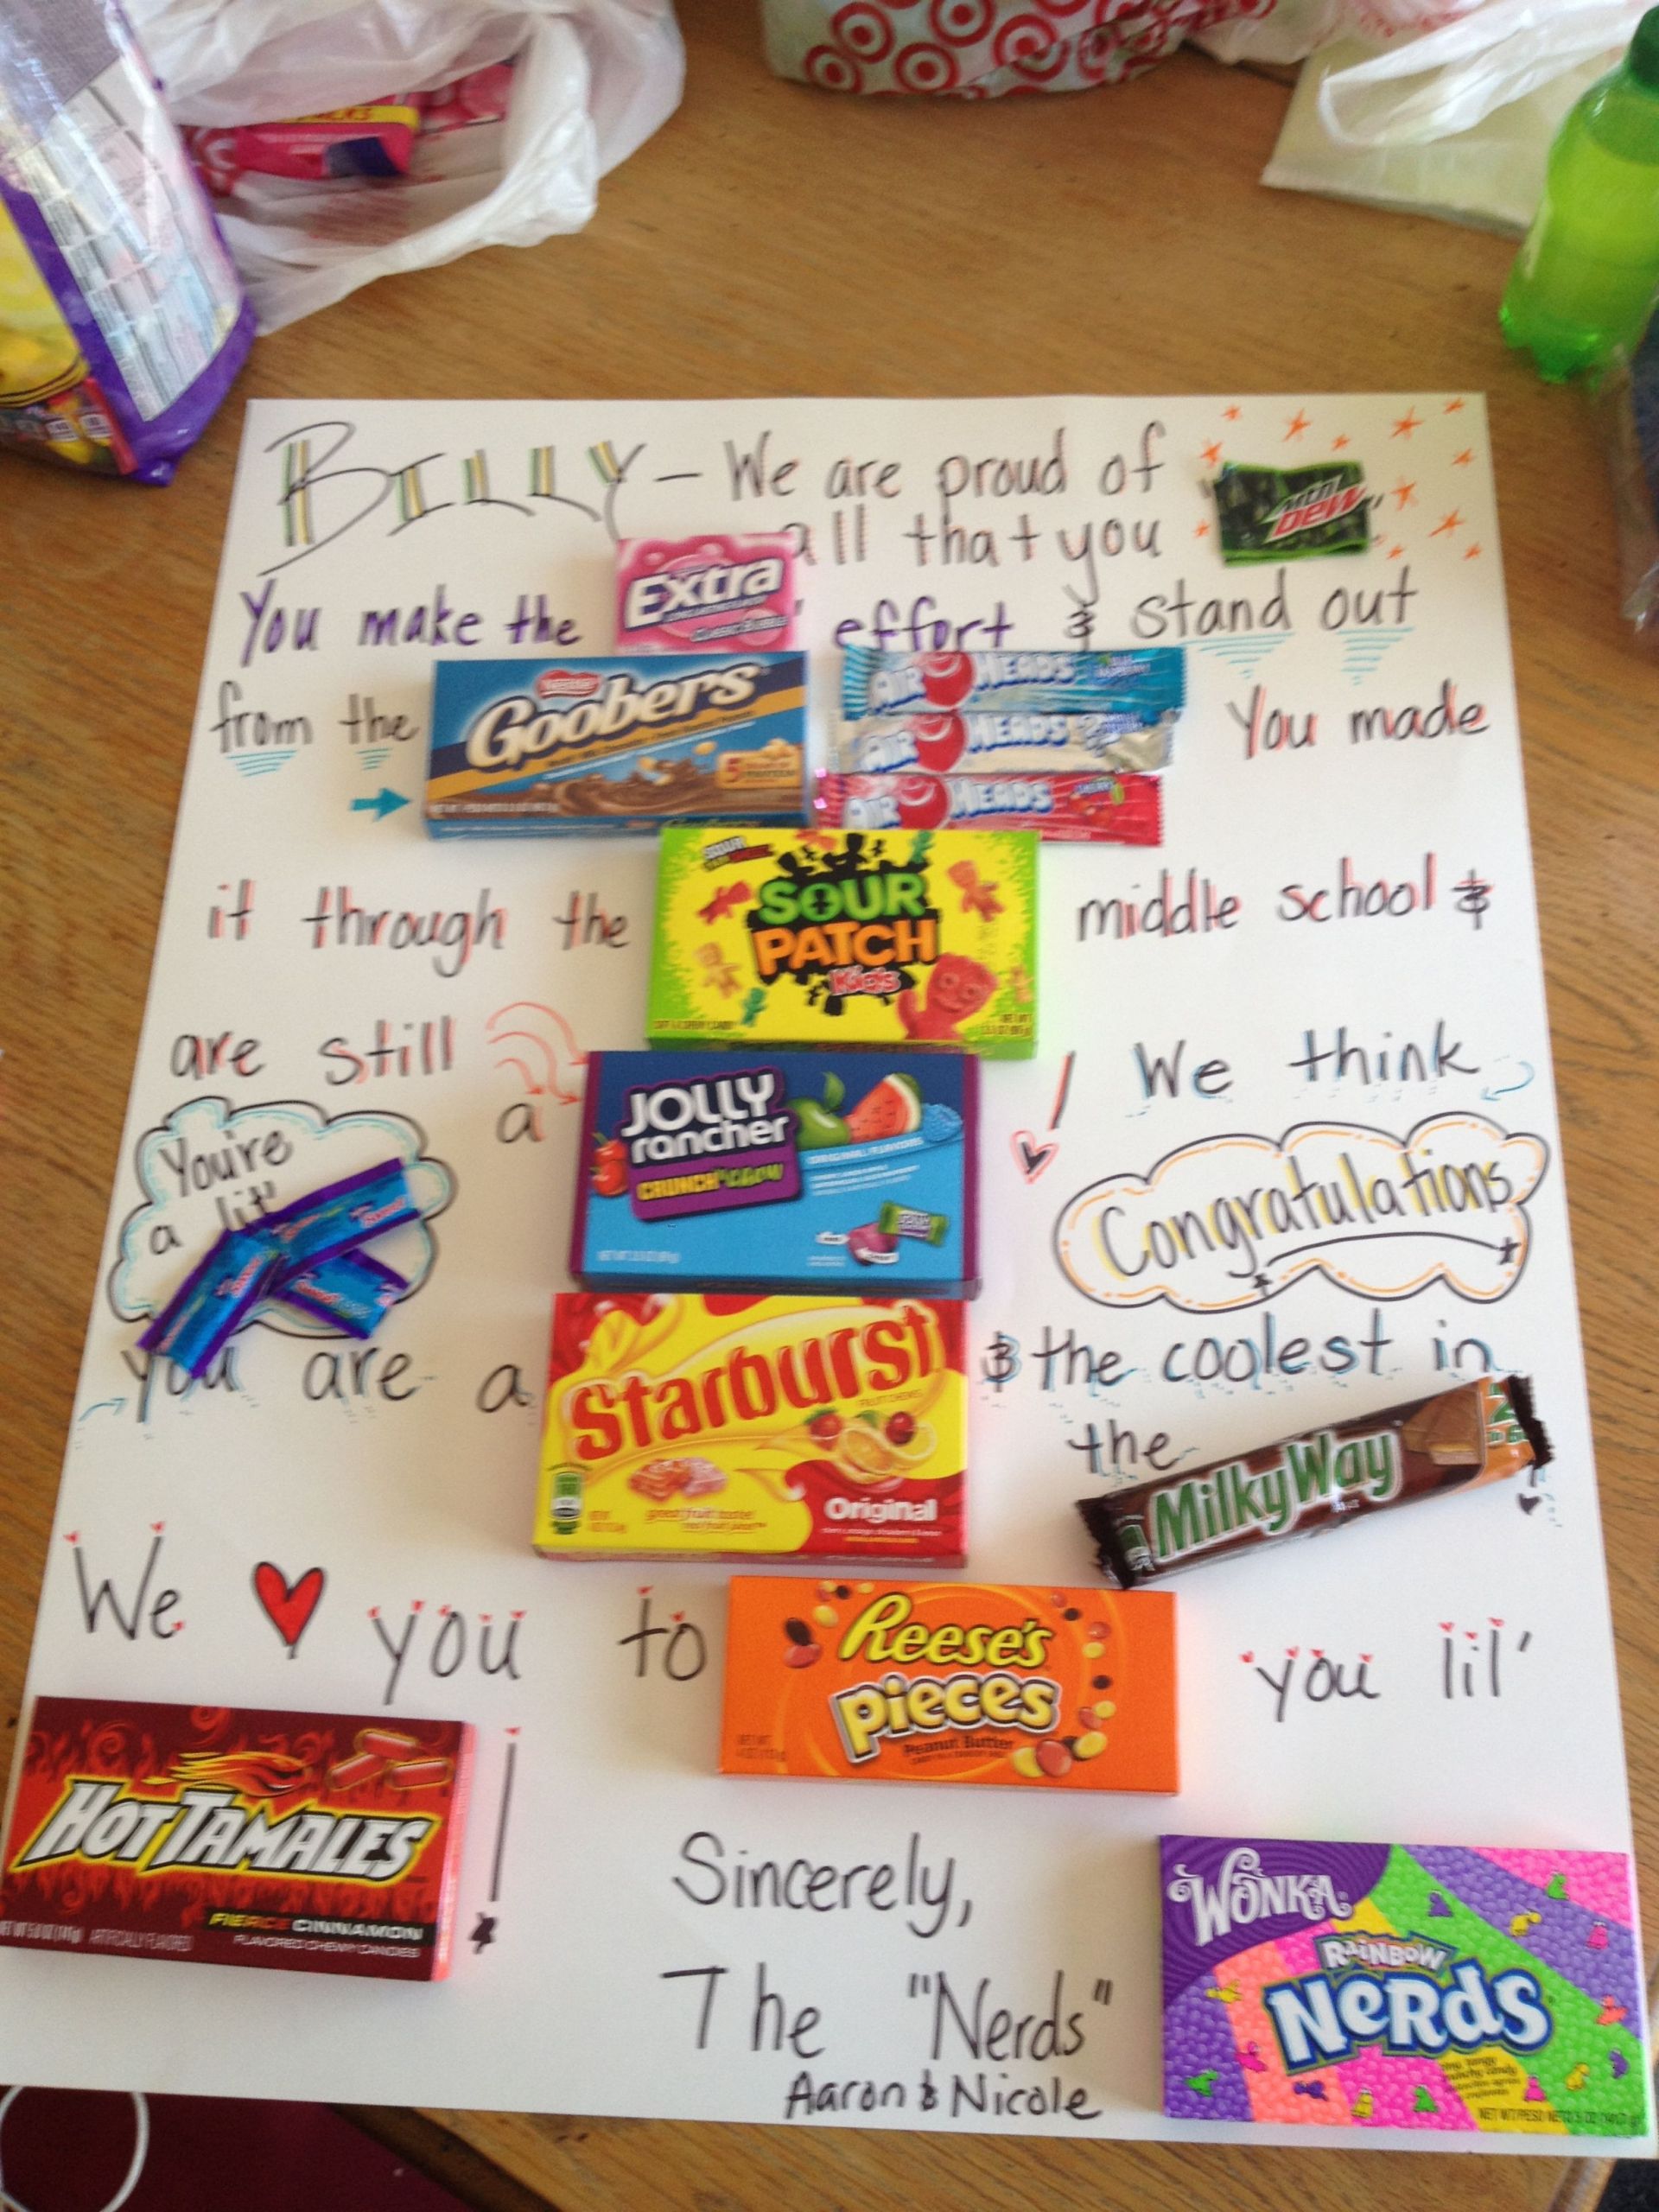 8Th Grade Graduation Gift Ideas For Him
 A candy card for a boy promoting graduating middle school